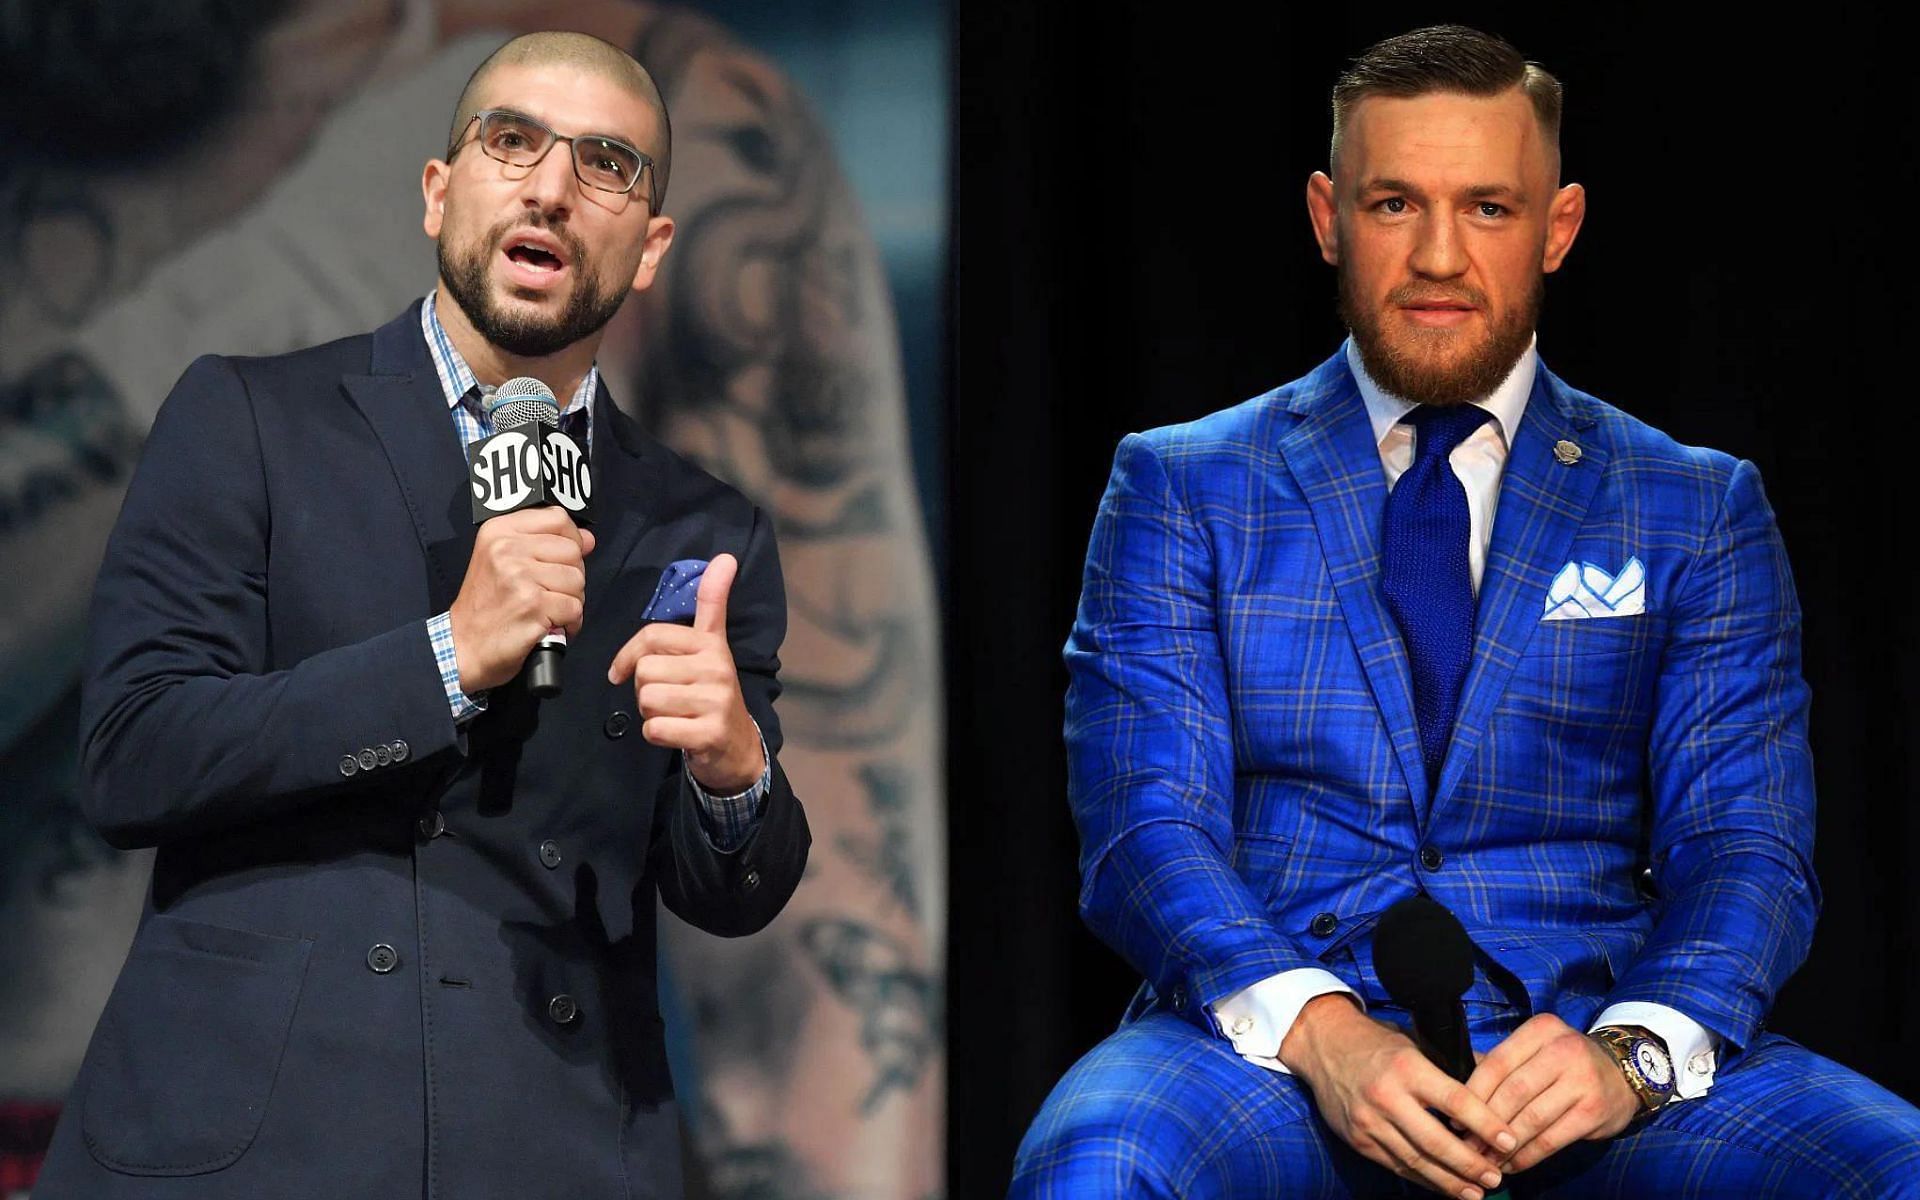 Ariel Helwani (left) and Conor McGregor (right) [Images courtesy of Getty]